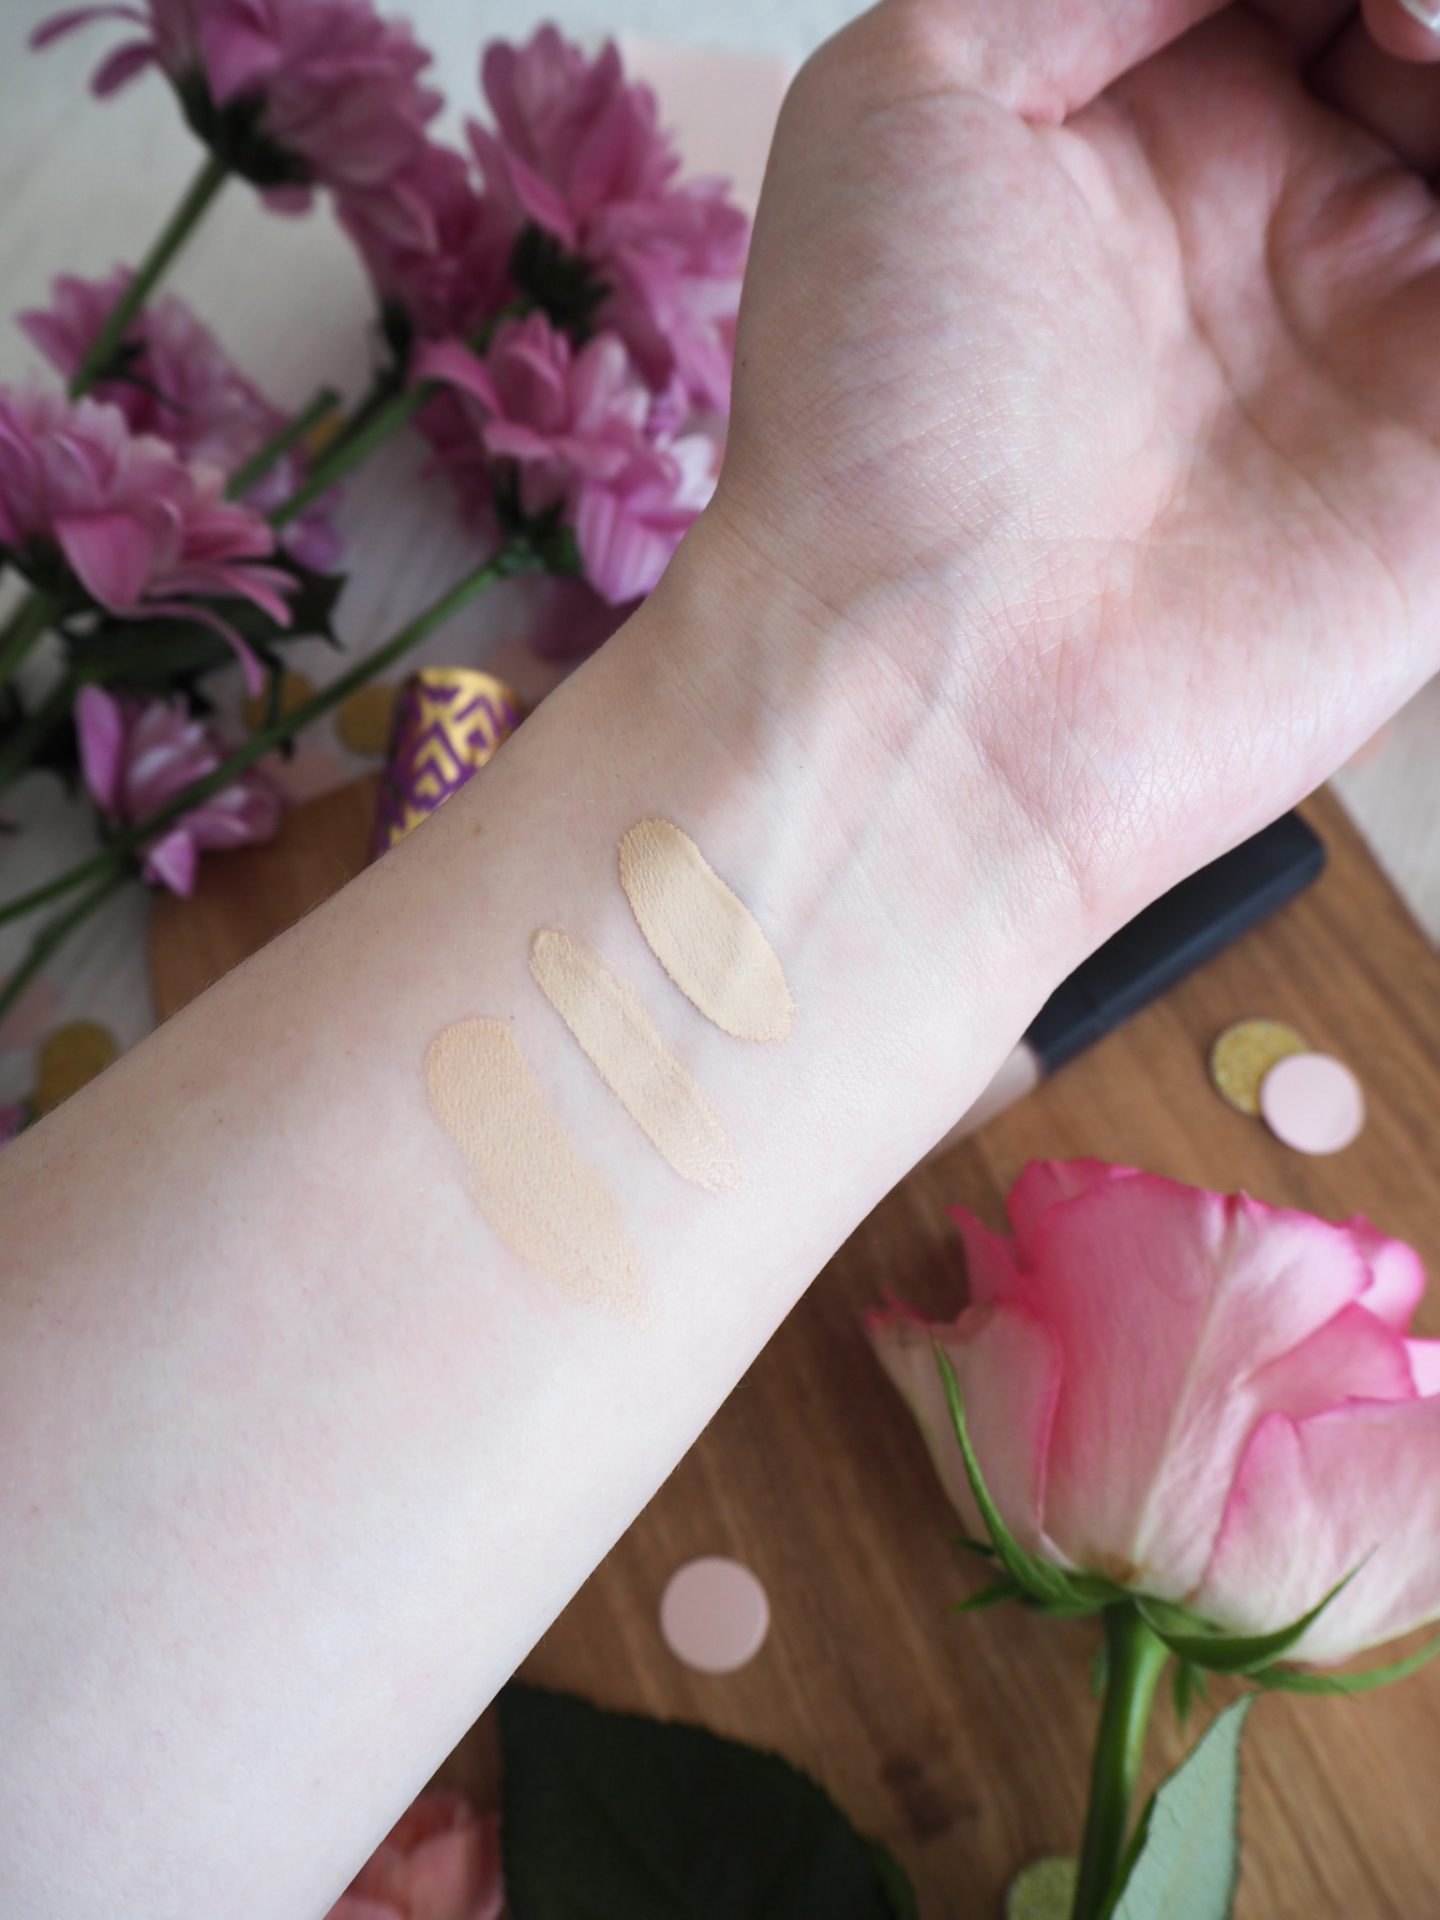 Concealers for Pale Skin Tarte Shape Tape in Fair, Nars Radiant Creamy Concealer in Chantilly, Nars Soft Matte Concealer in Chantilly